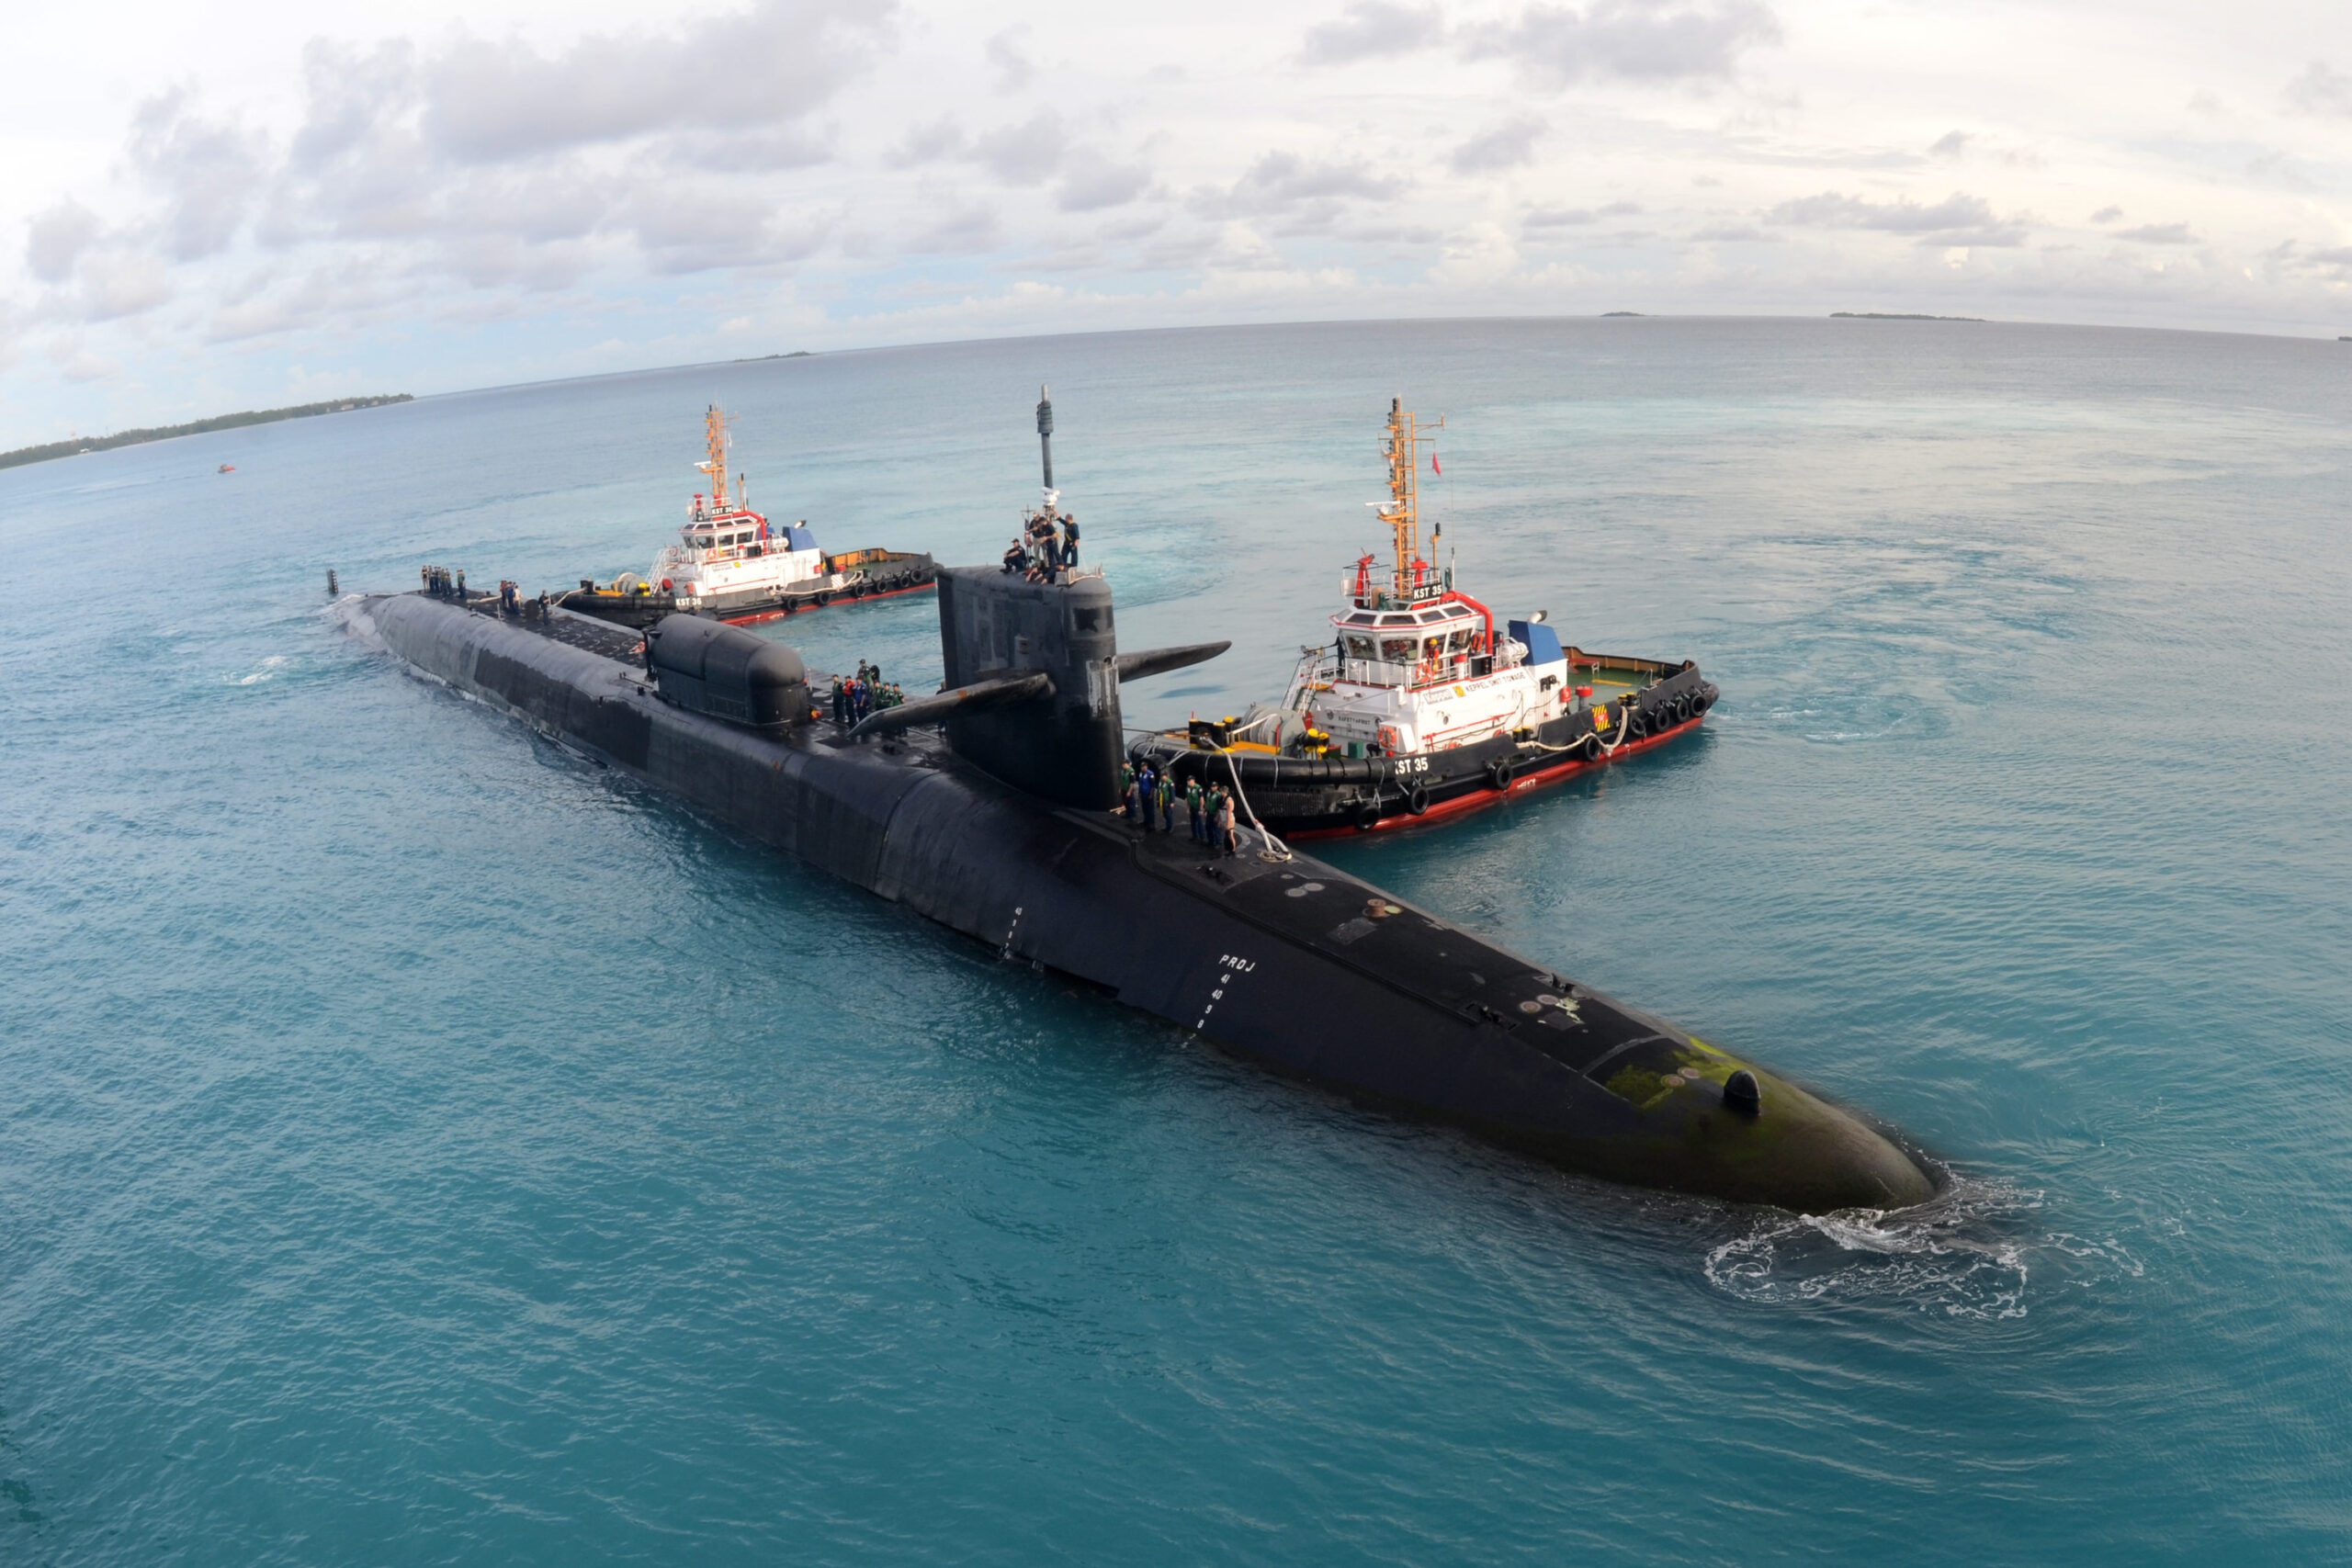 Ohio-class guided-missile submarine USS Georgia docking with the help of tugboats